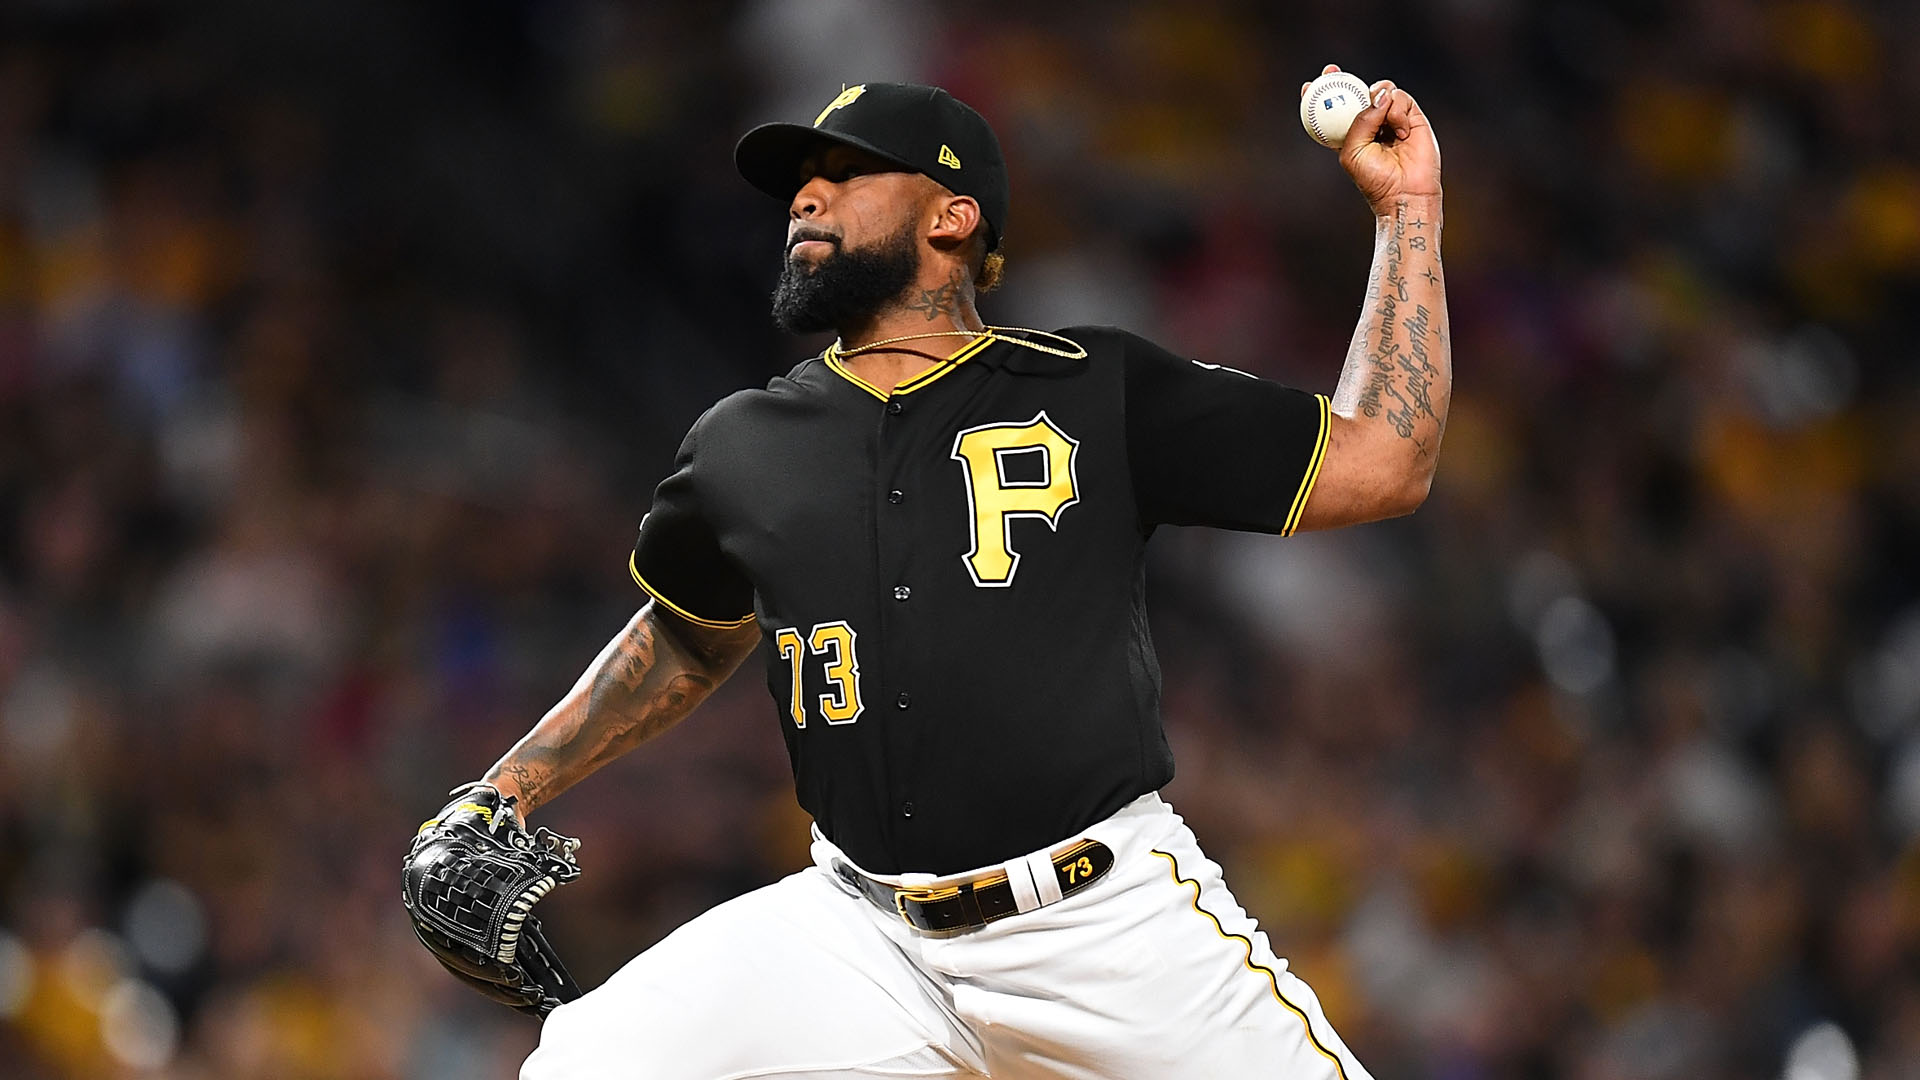 The Pirates closer is accused of soliciting a 15-year-old girl to meet for sex once the season ends and providing obscene items to minors.